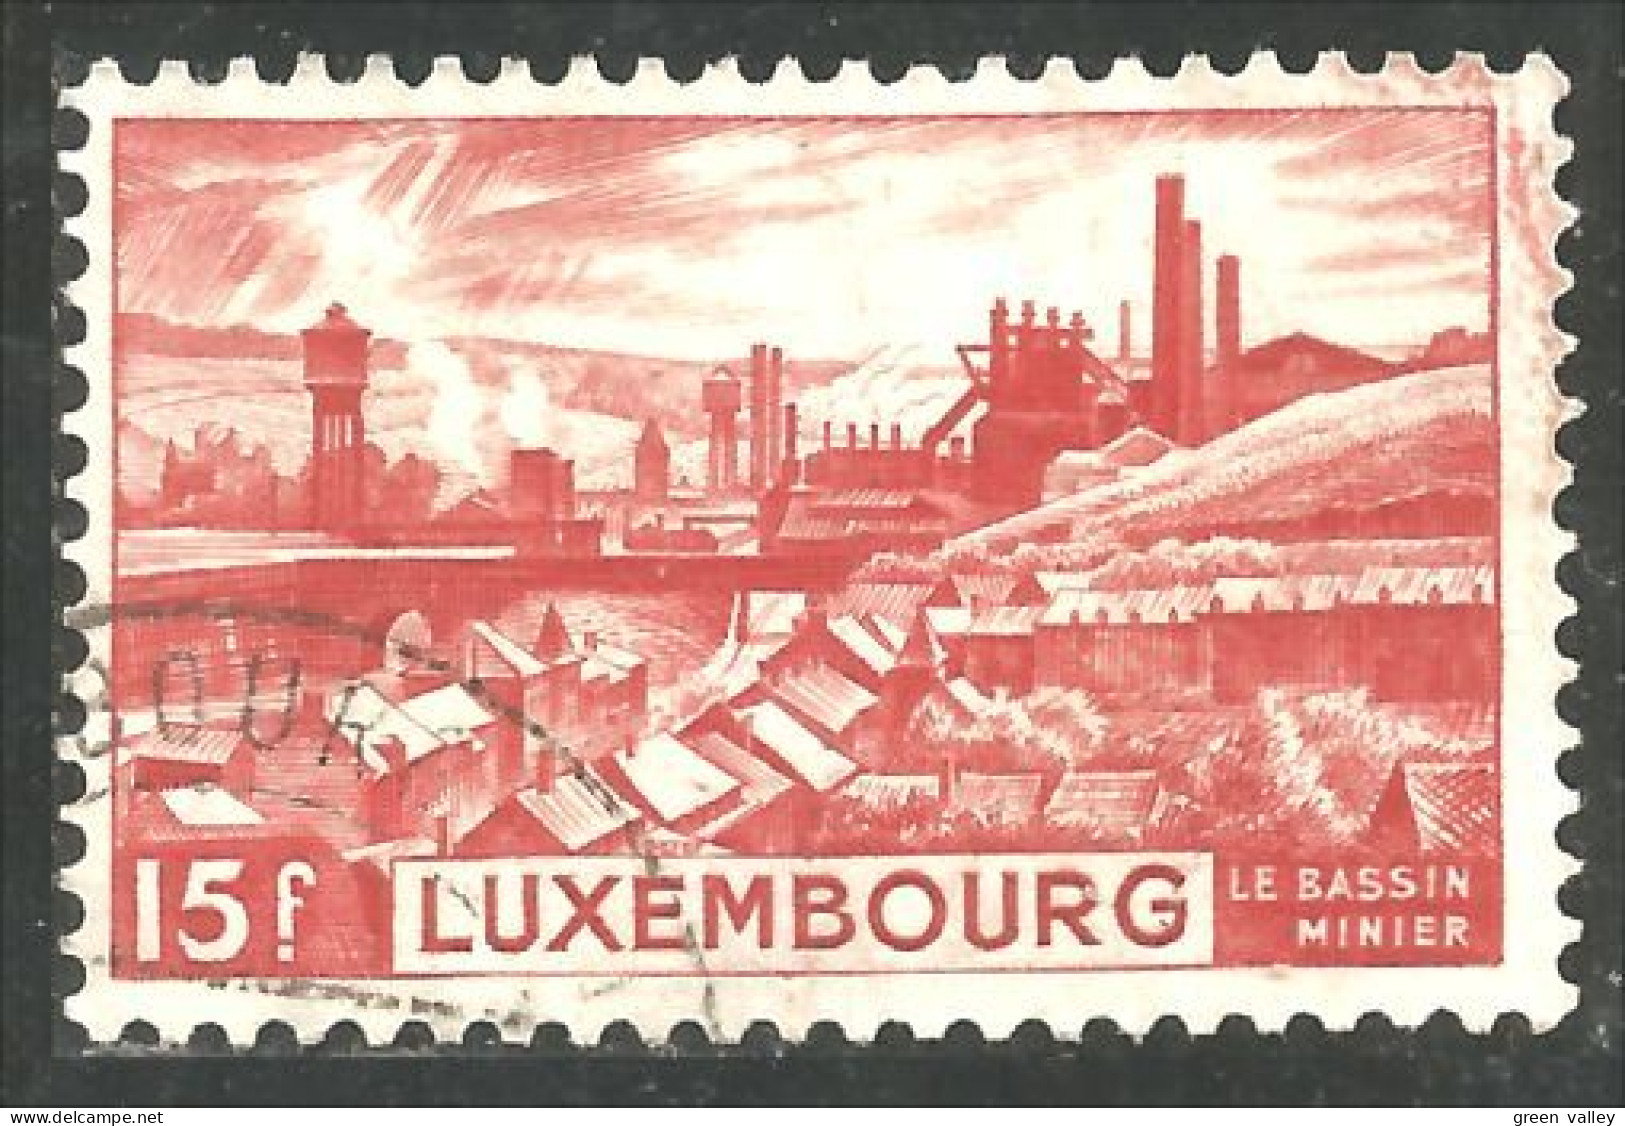 584 Luxembourg Bassin Minier Mines Mining Coal Charbon Kohl (LUX-127) - Minerales